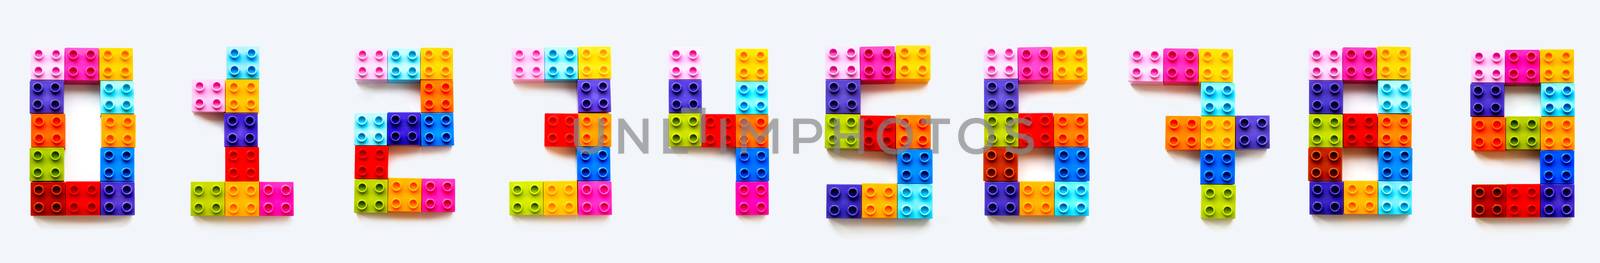 Set of numbers from 0 to 9 made of colorful constructor blocks. by aksenovko